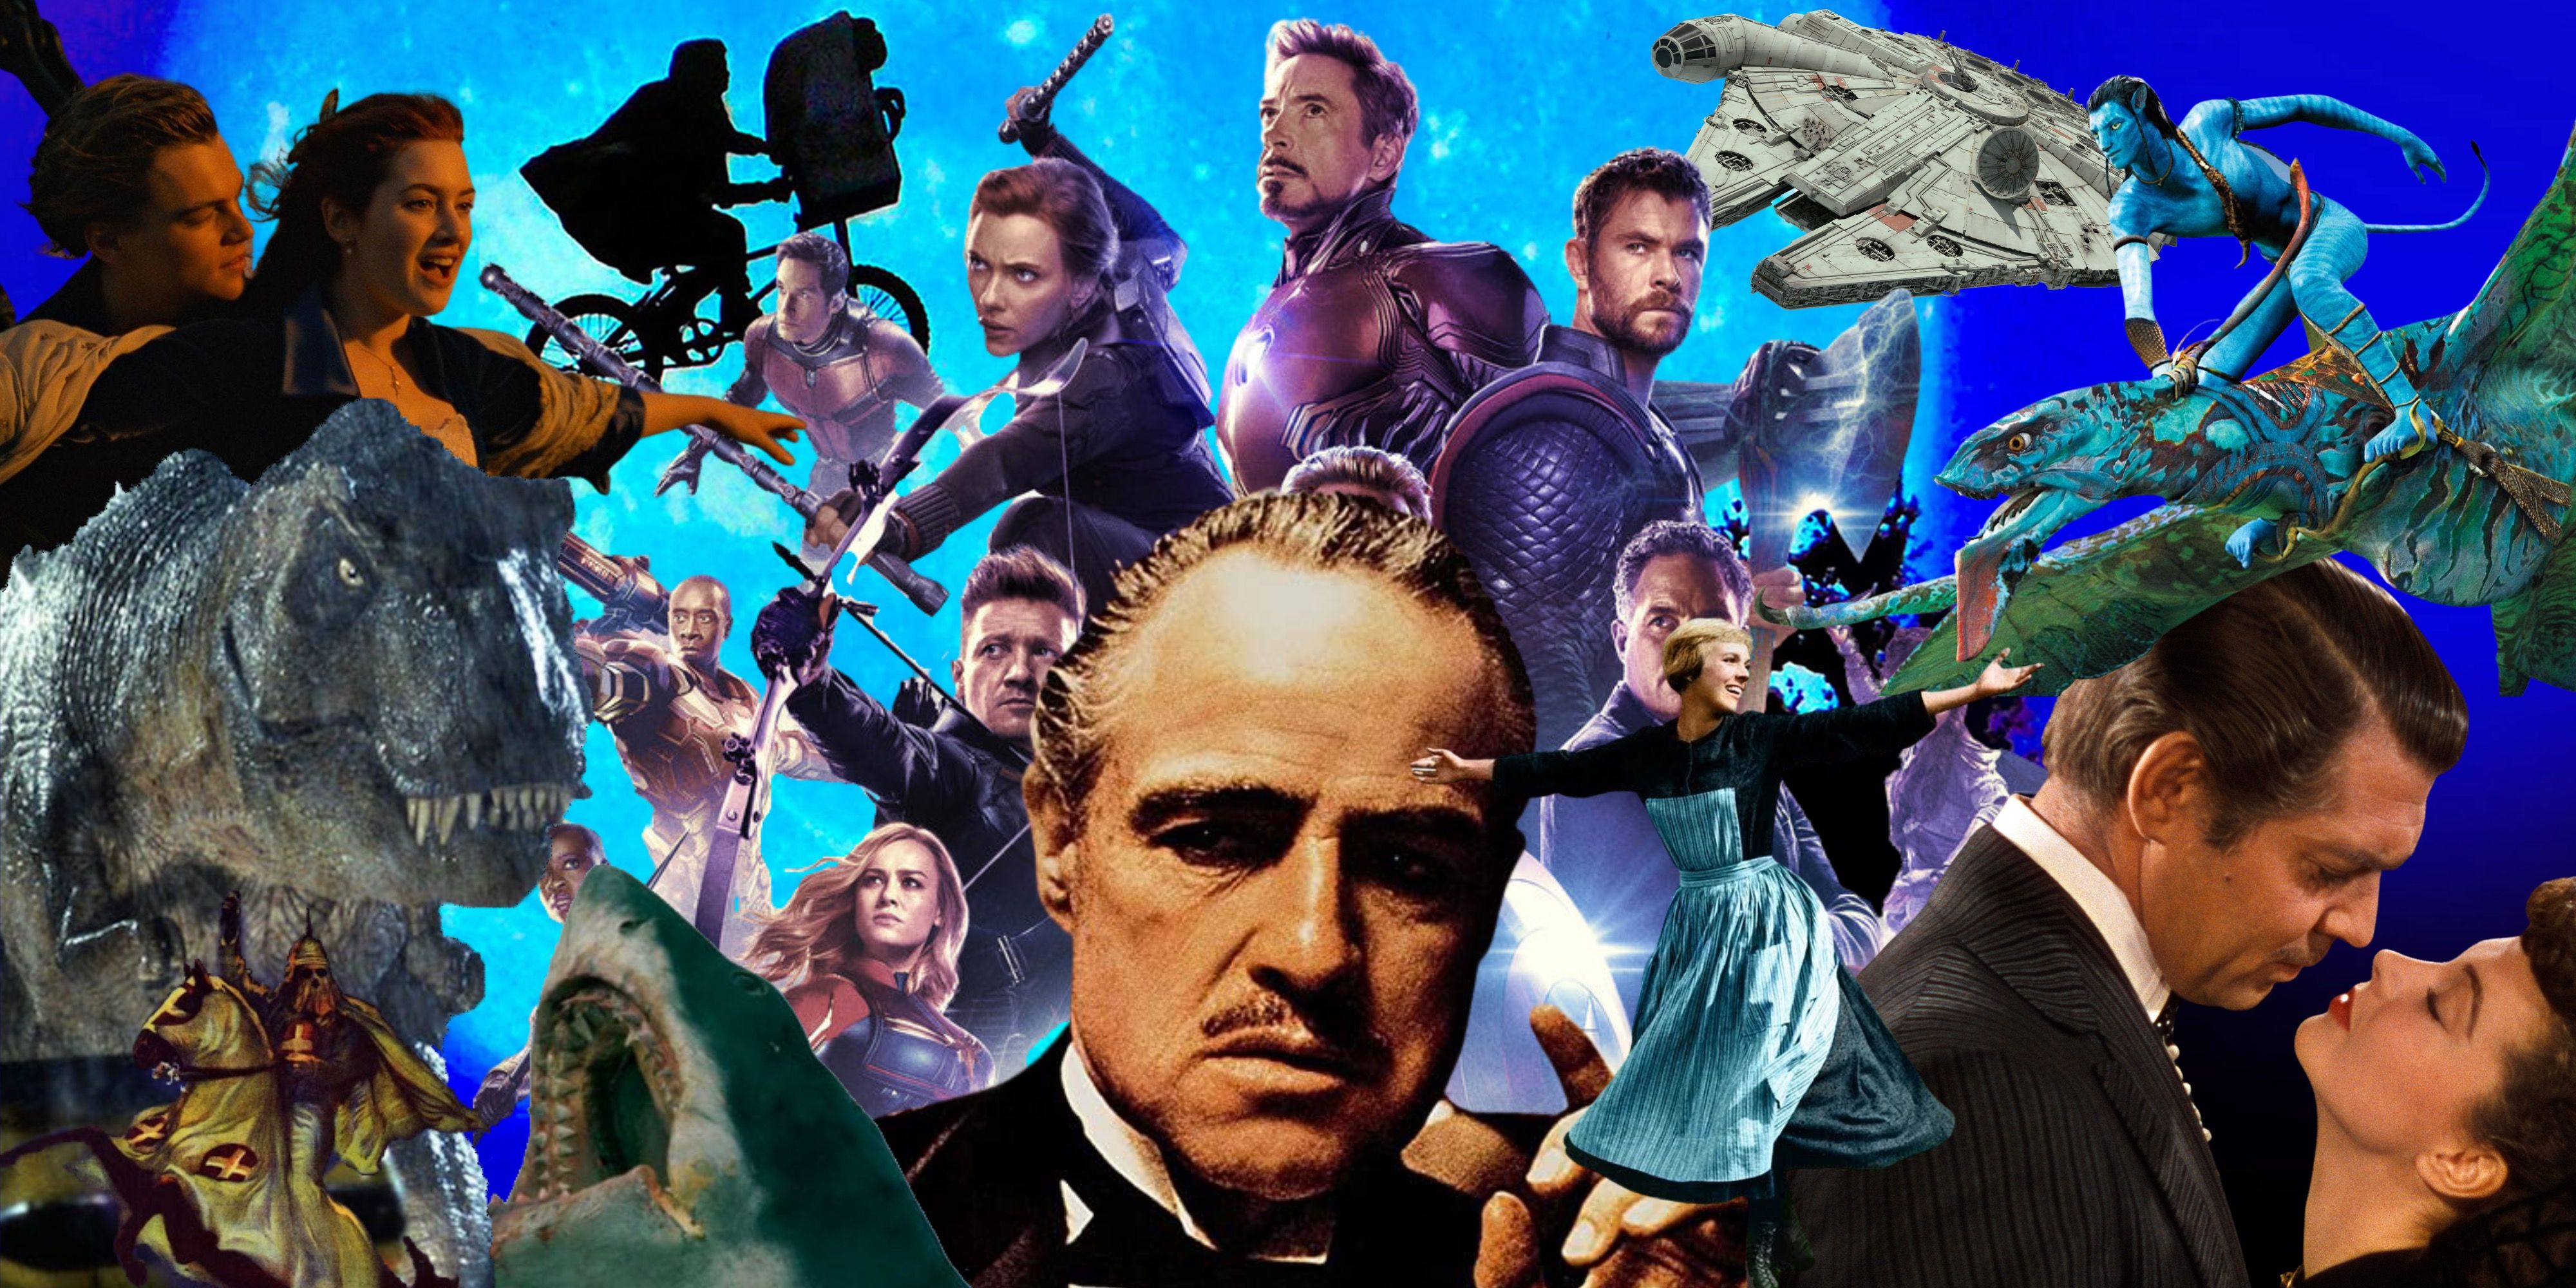 Every Film To The HighestGrossing Movie Of All Time (& For How